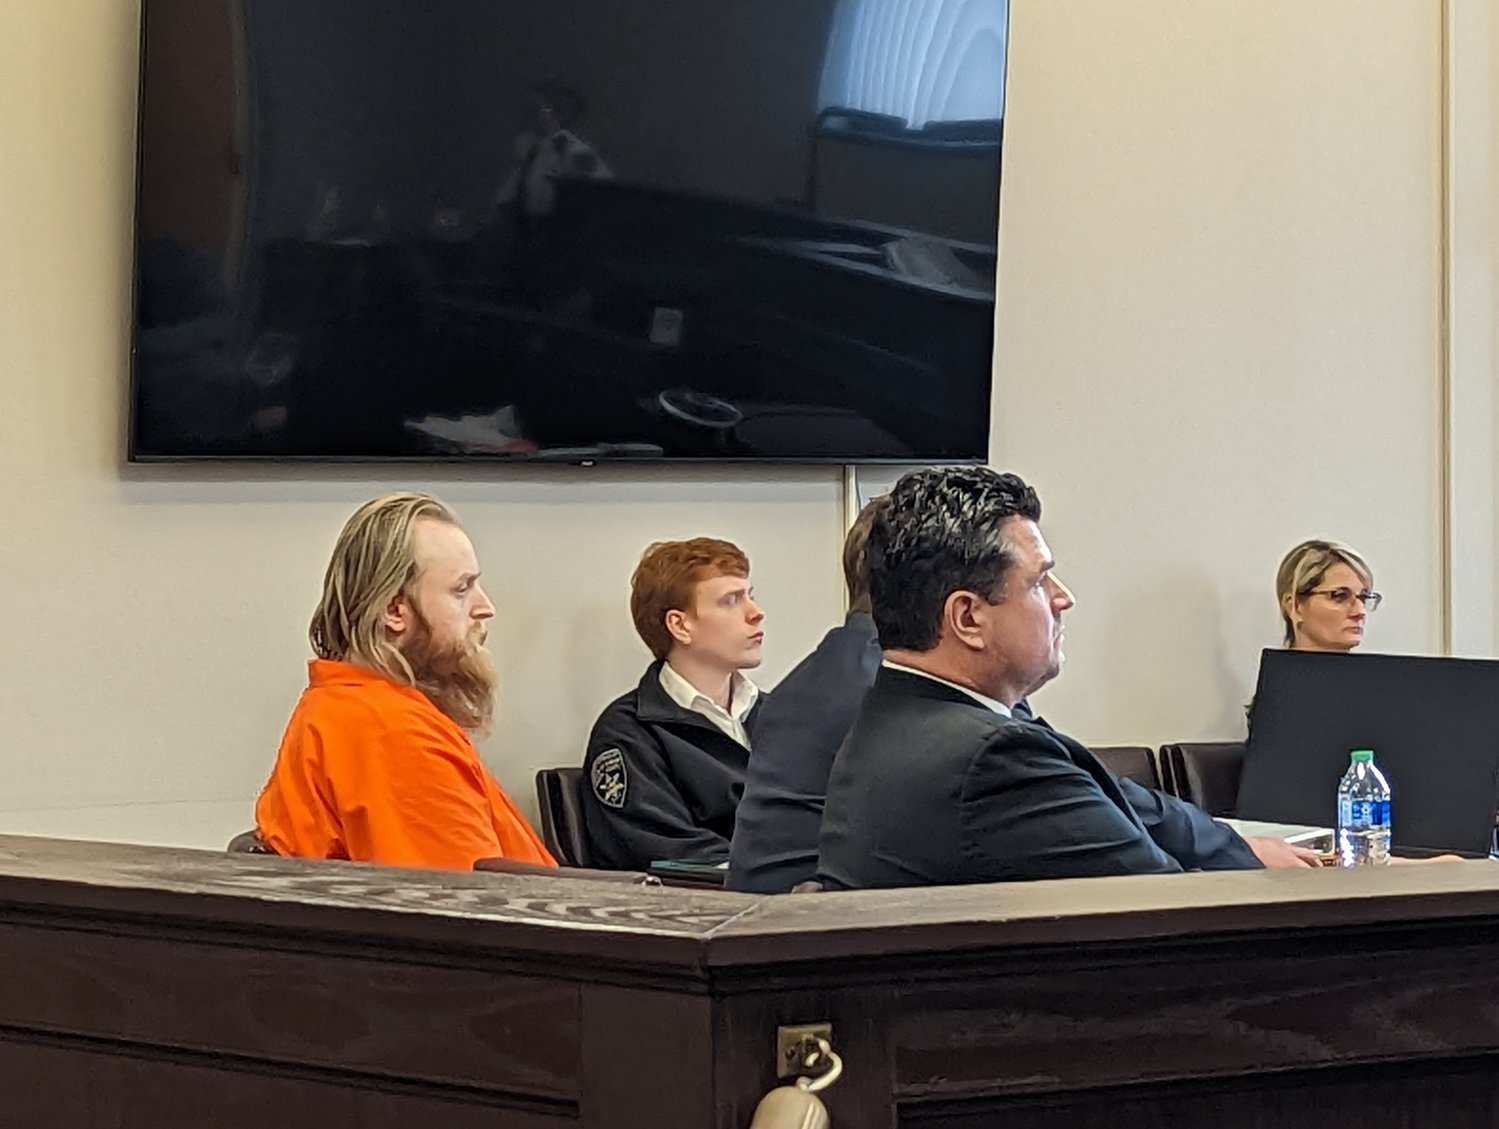 Accused killer Matthew Westcott sits with his defense team at the first day of his trial on Monday in Oneida County Court. He is accused of shooting and killing his older brother at their family home in Taberg in September 2021. Westcott has chosen not to dress in civilian clothing, as was offered, and instead wore his orange Oneida County Jail jumpsuit on Monday.